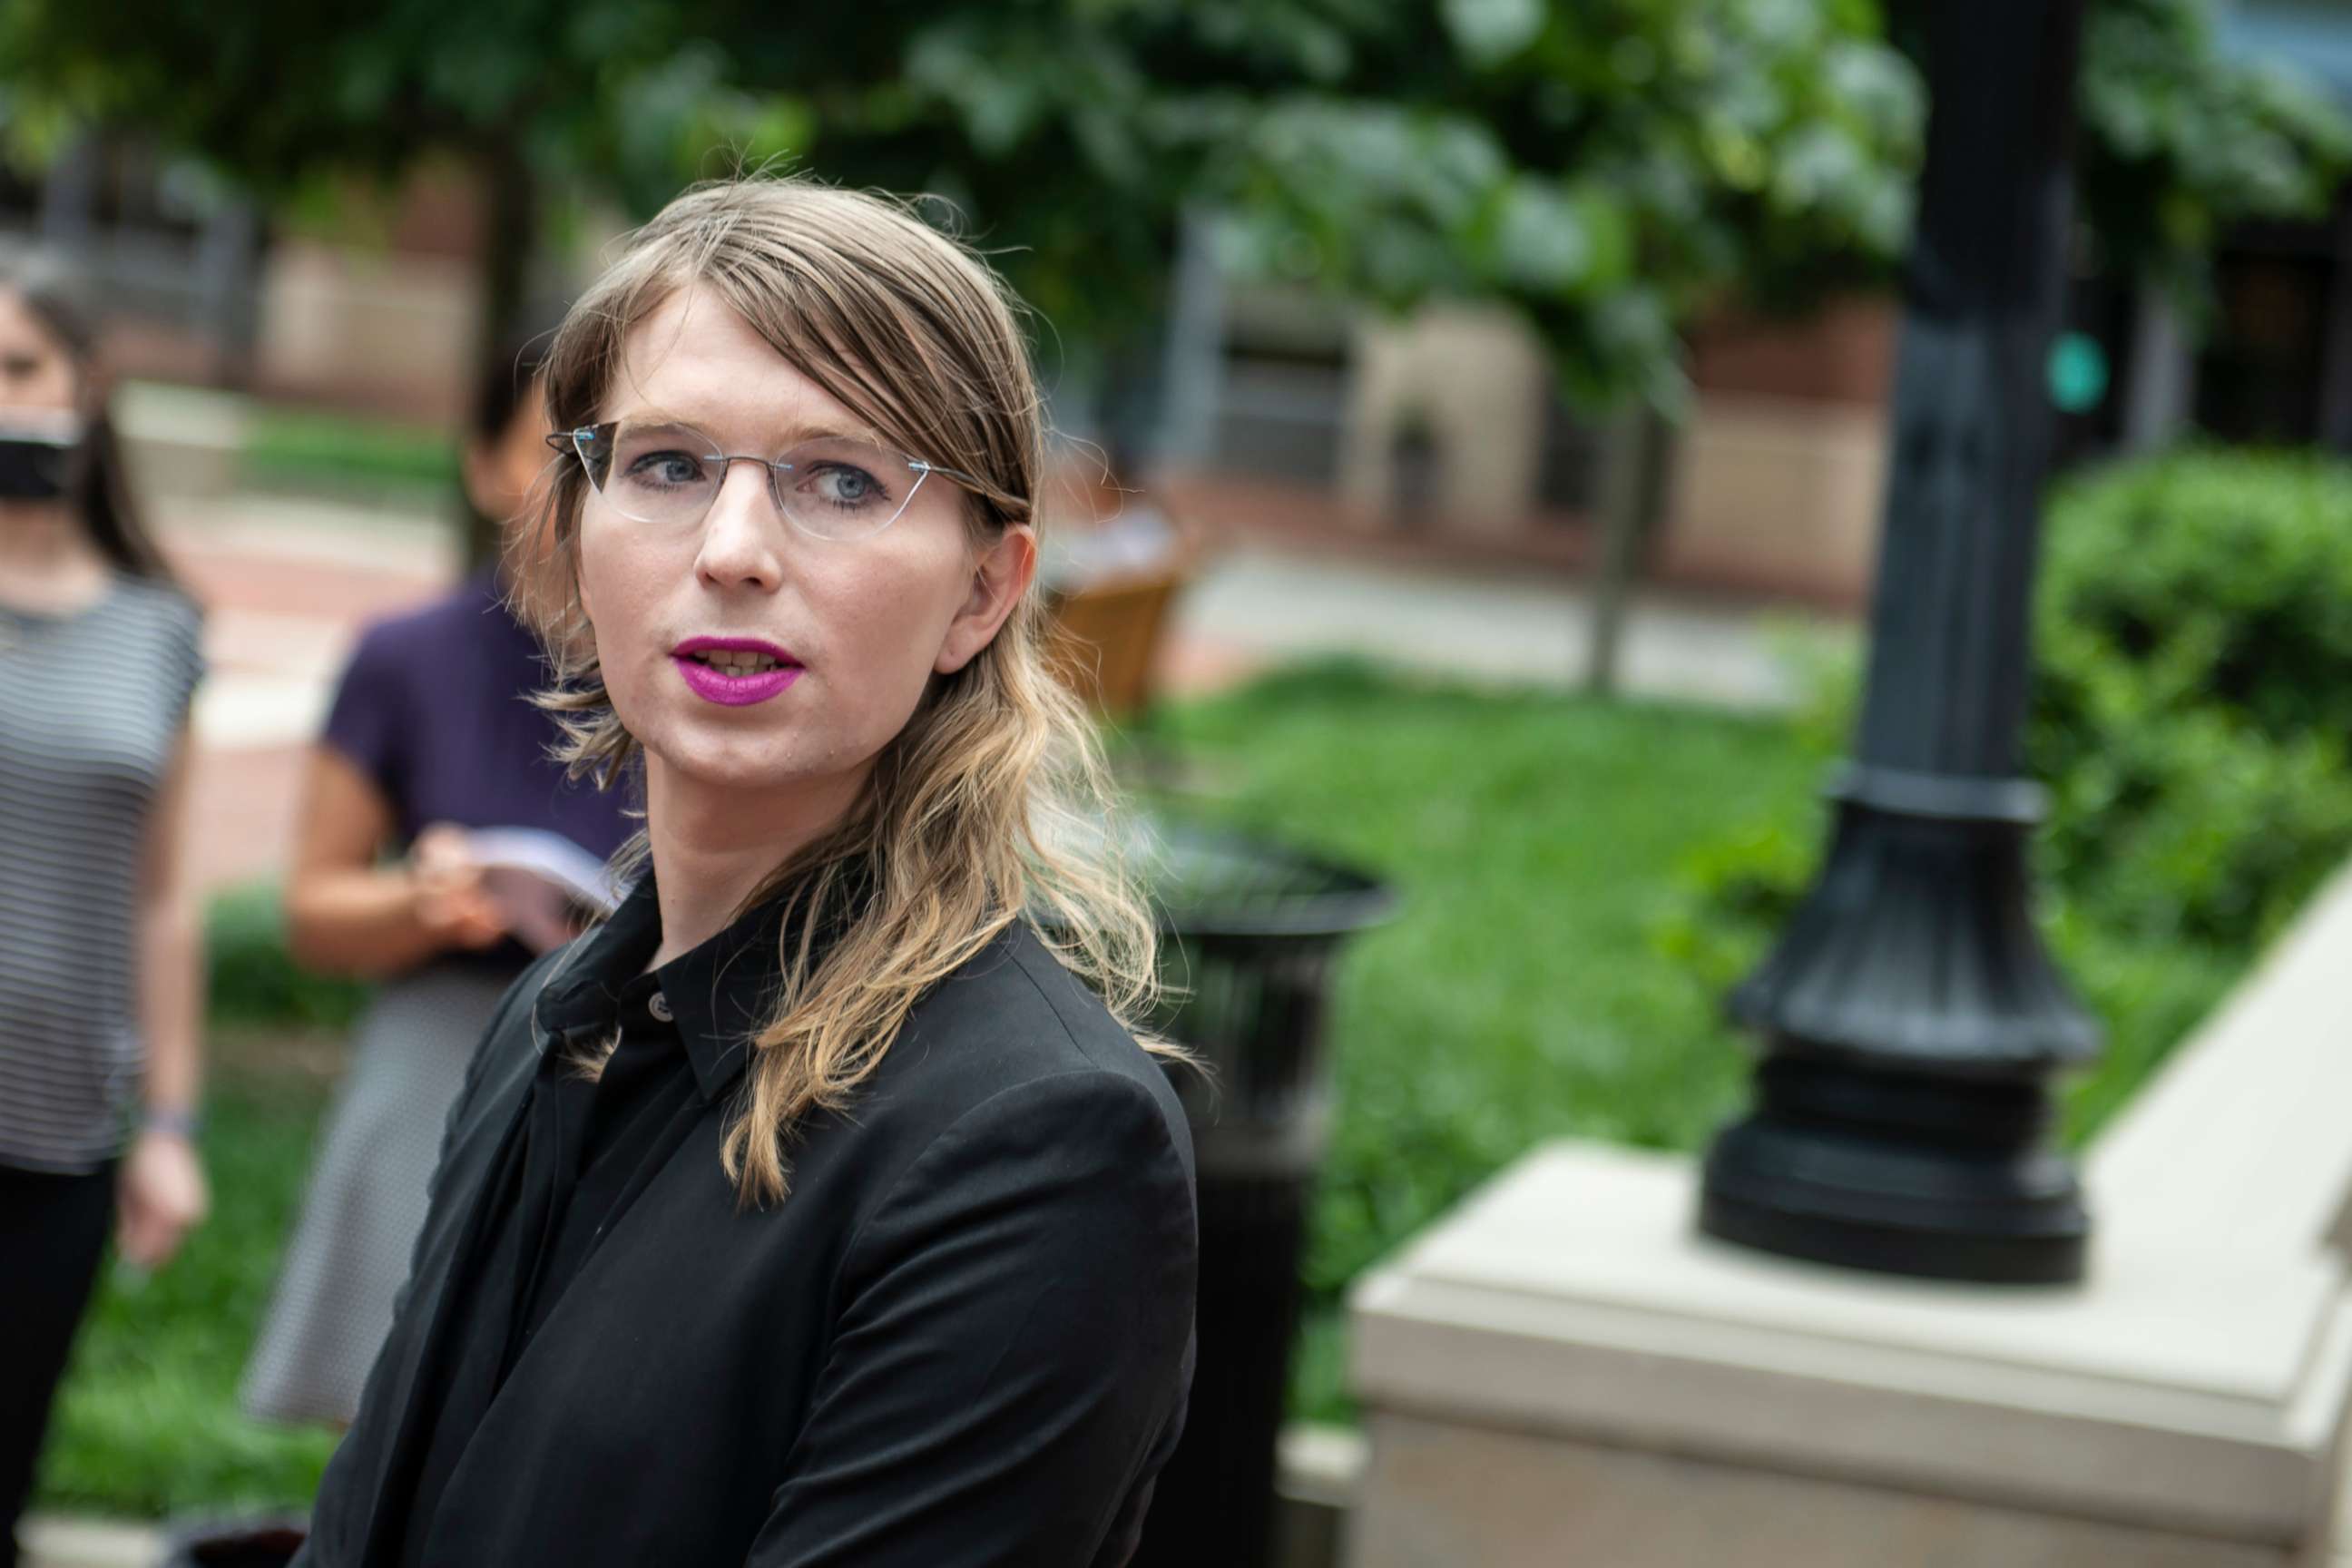 PHOTO: In this May 19, 2019, file photo, former military intelligence analyst Chelsea Manning speaks to the press ahead of a Grand Jury appearance about WikiLeaks, in Alexandria, Va.